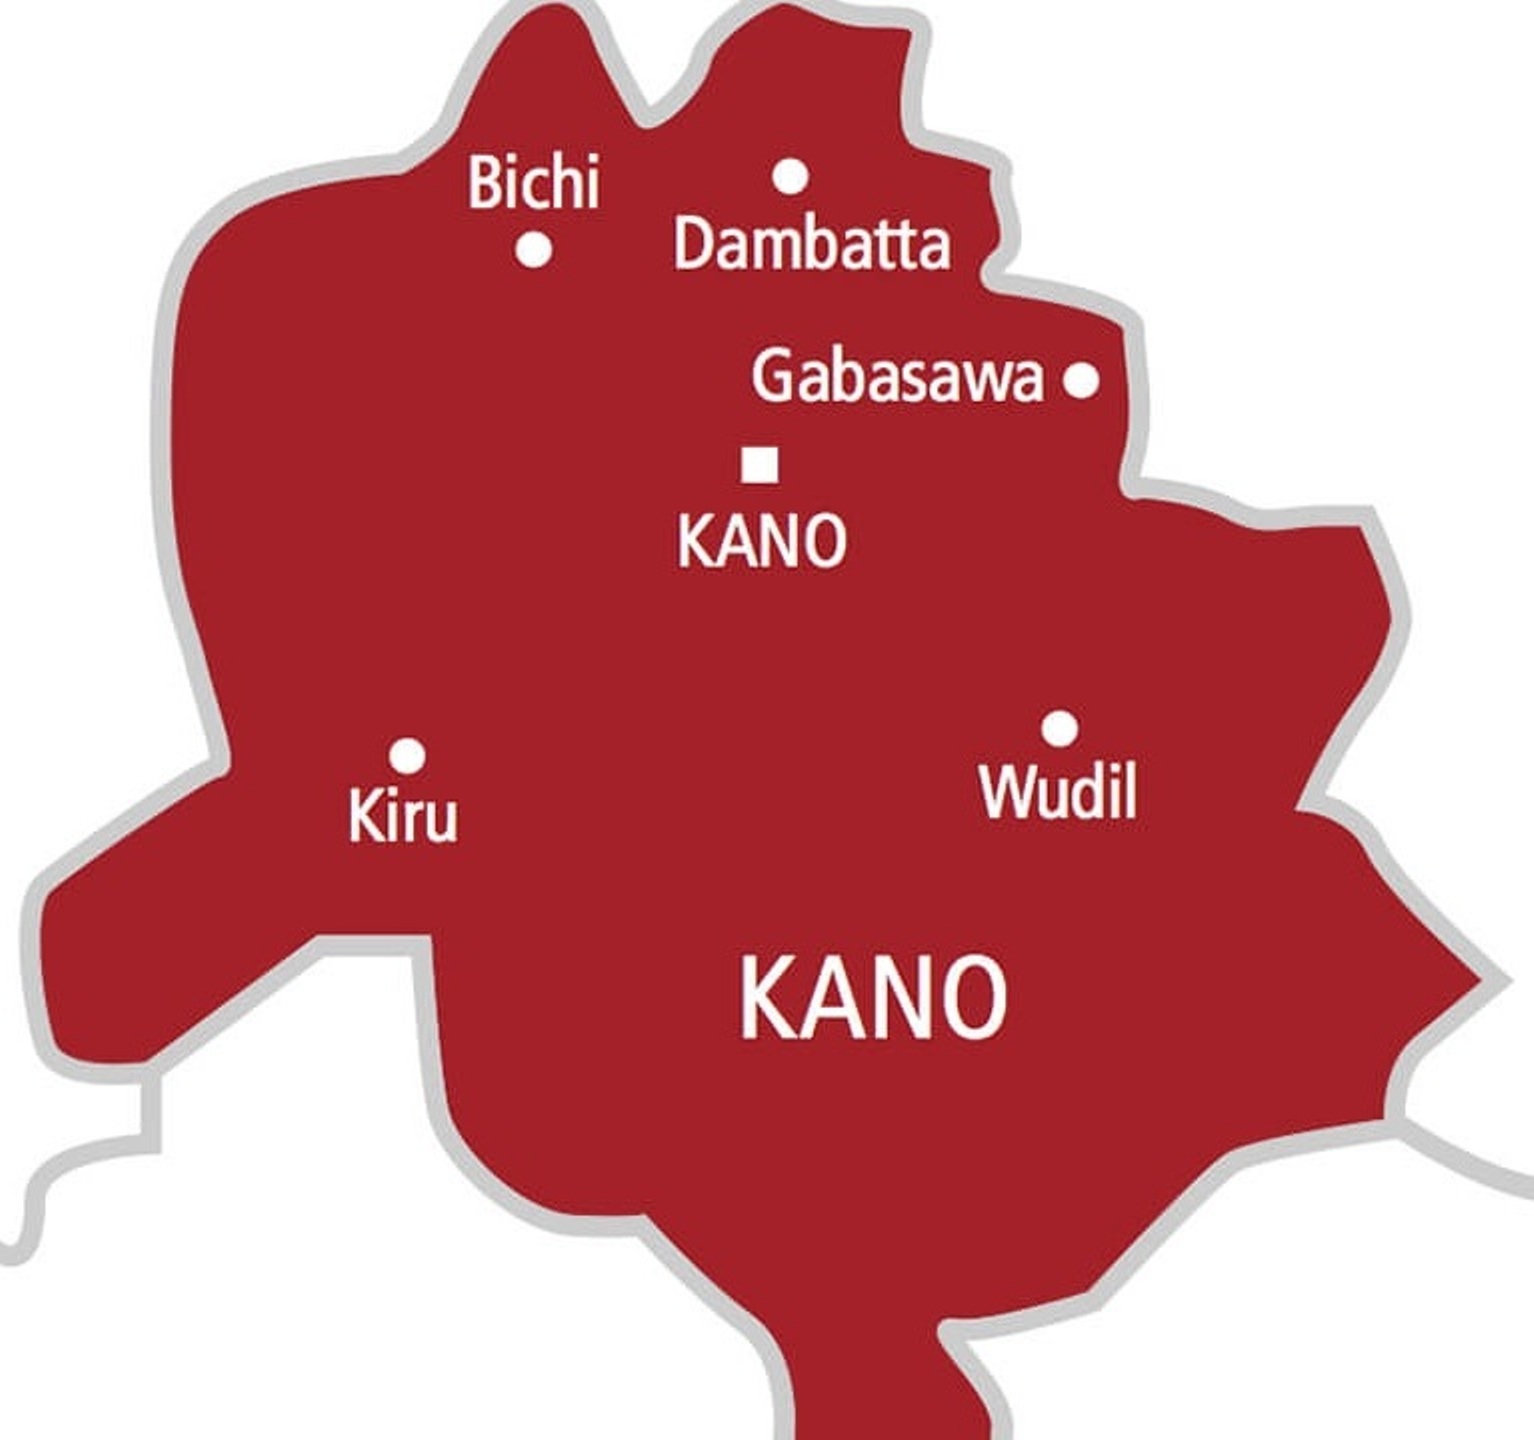 20 Dead, Over 14 Missing In Kano Boat Accident